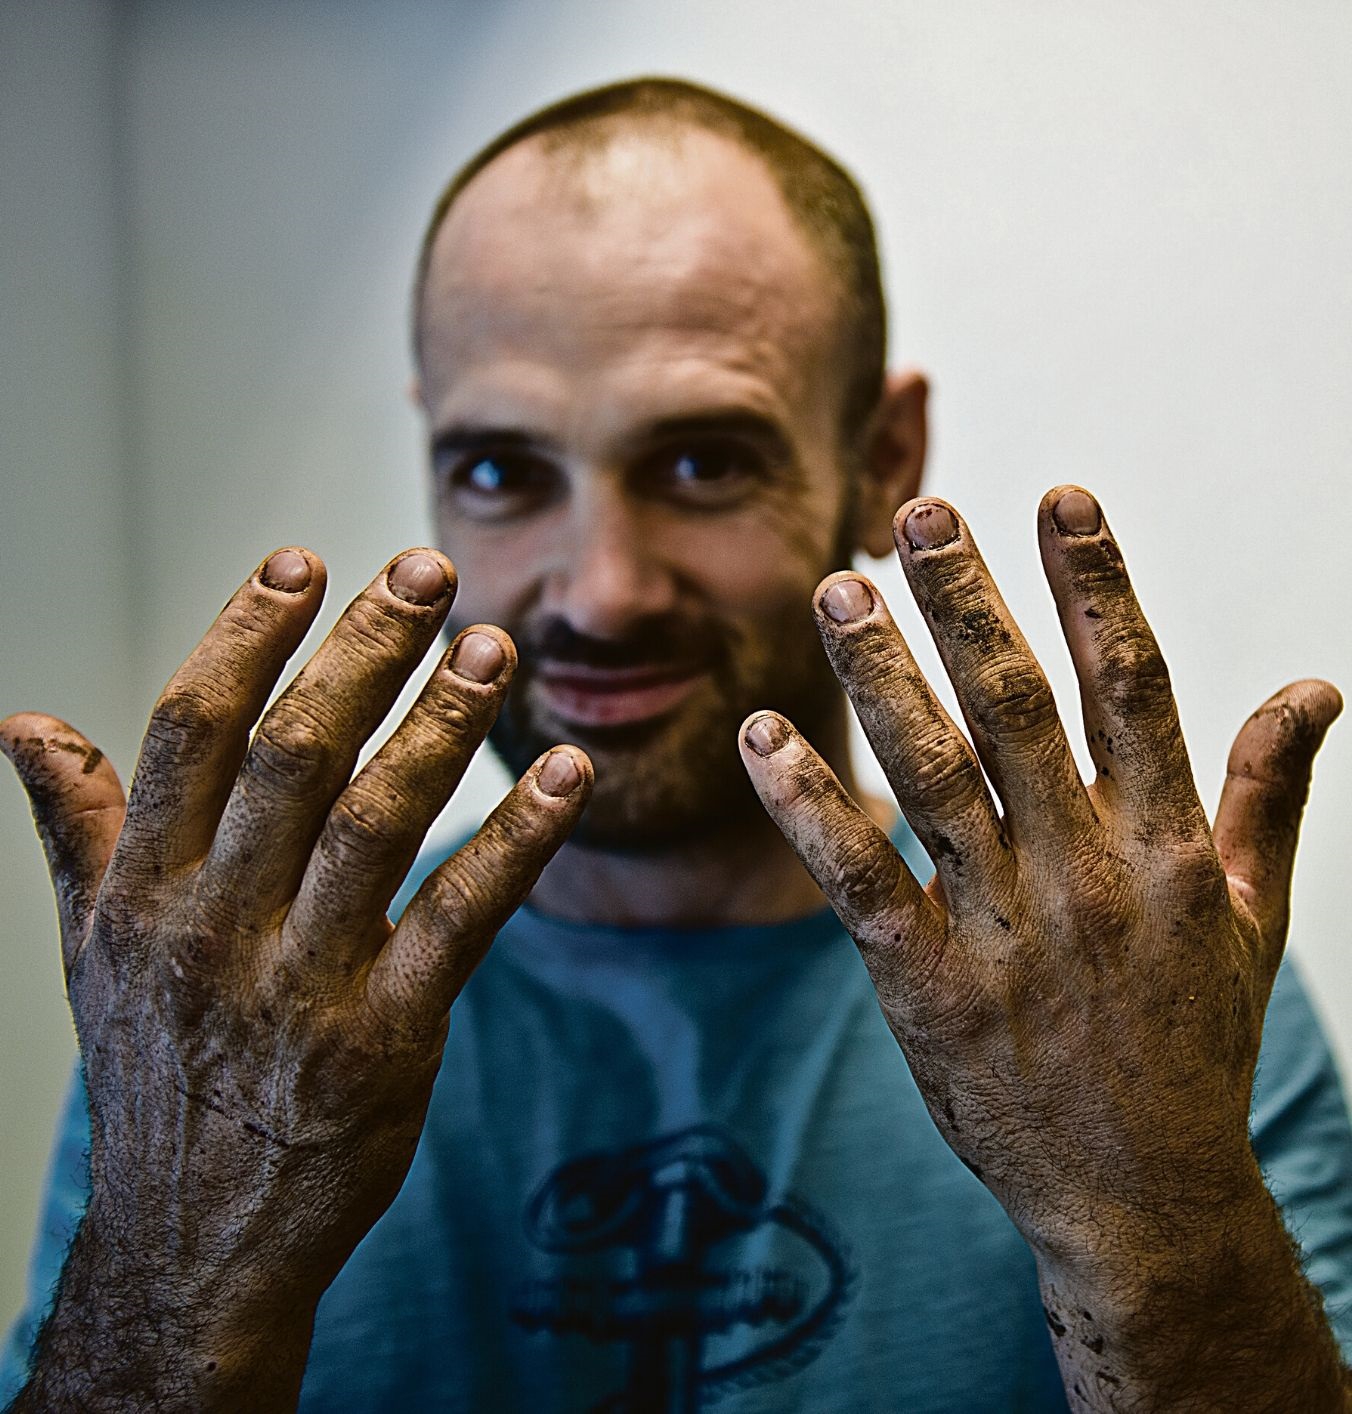 Ed Stafford on the power of being vulnerable